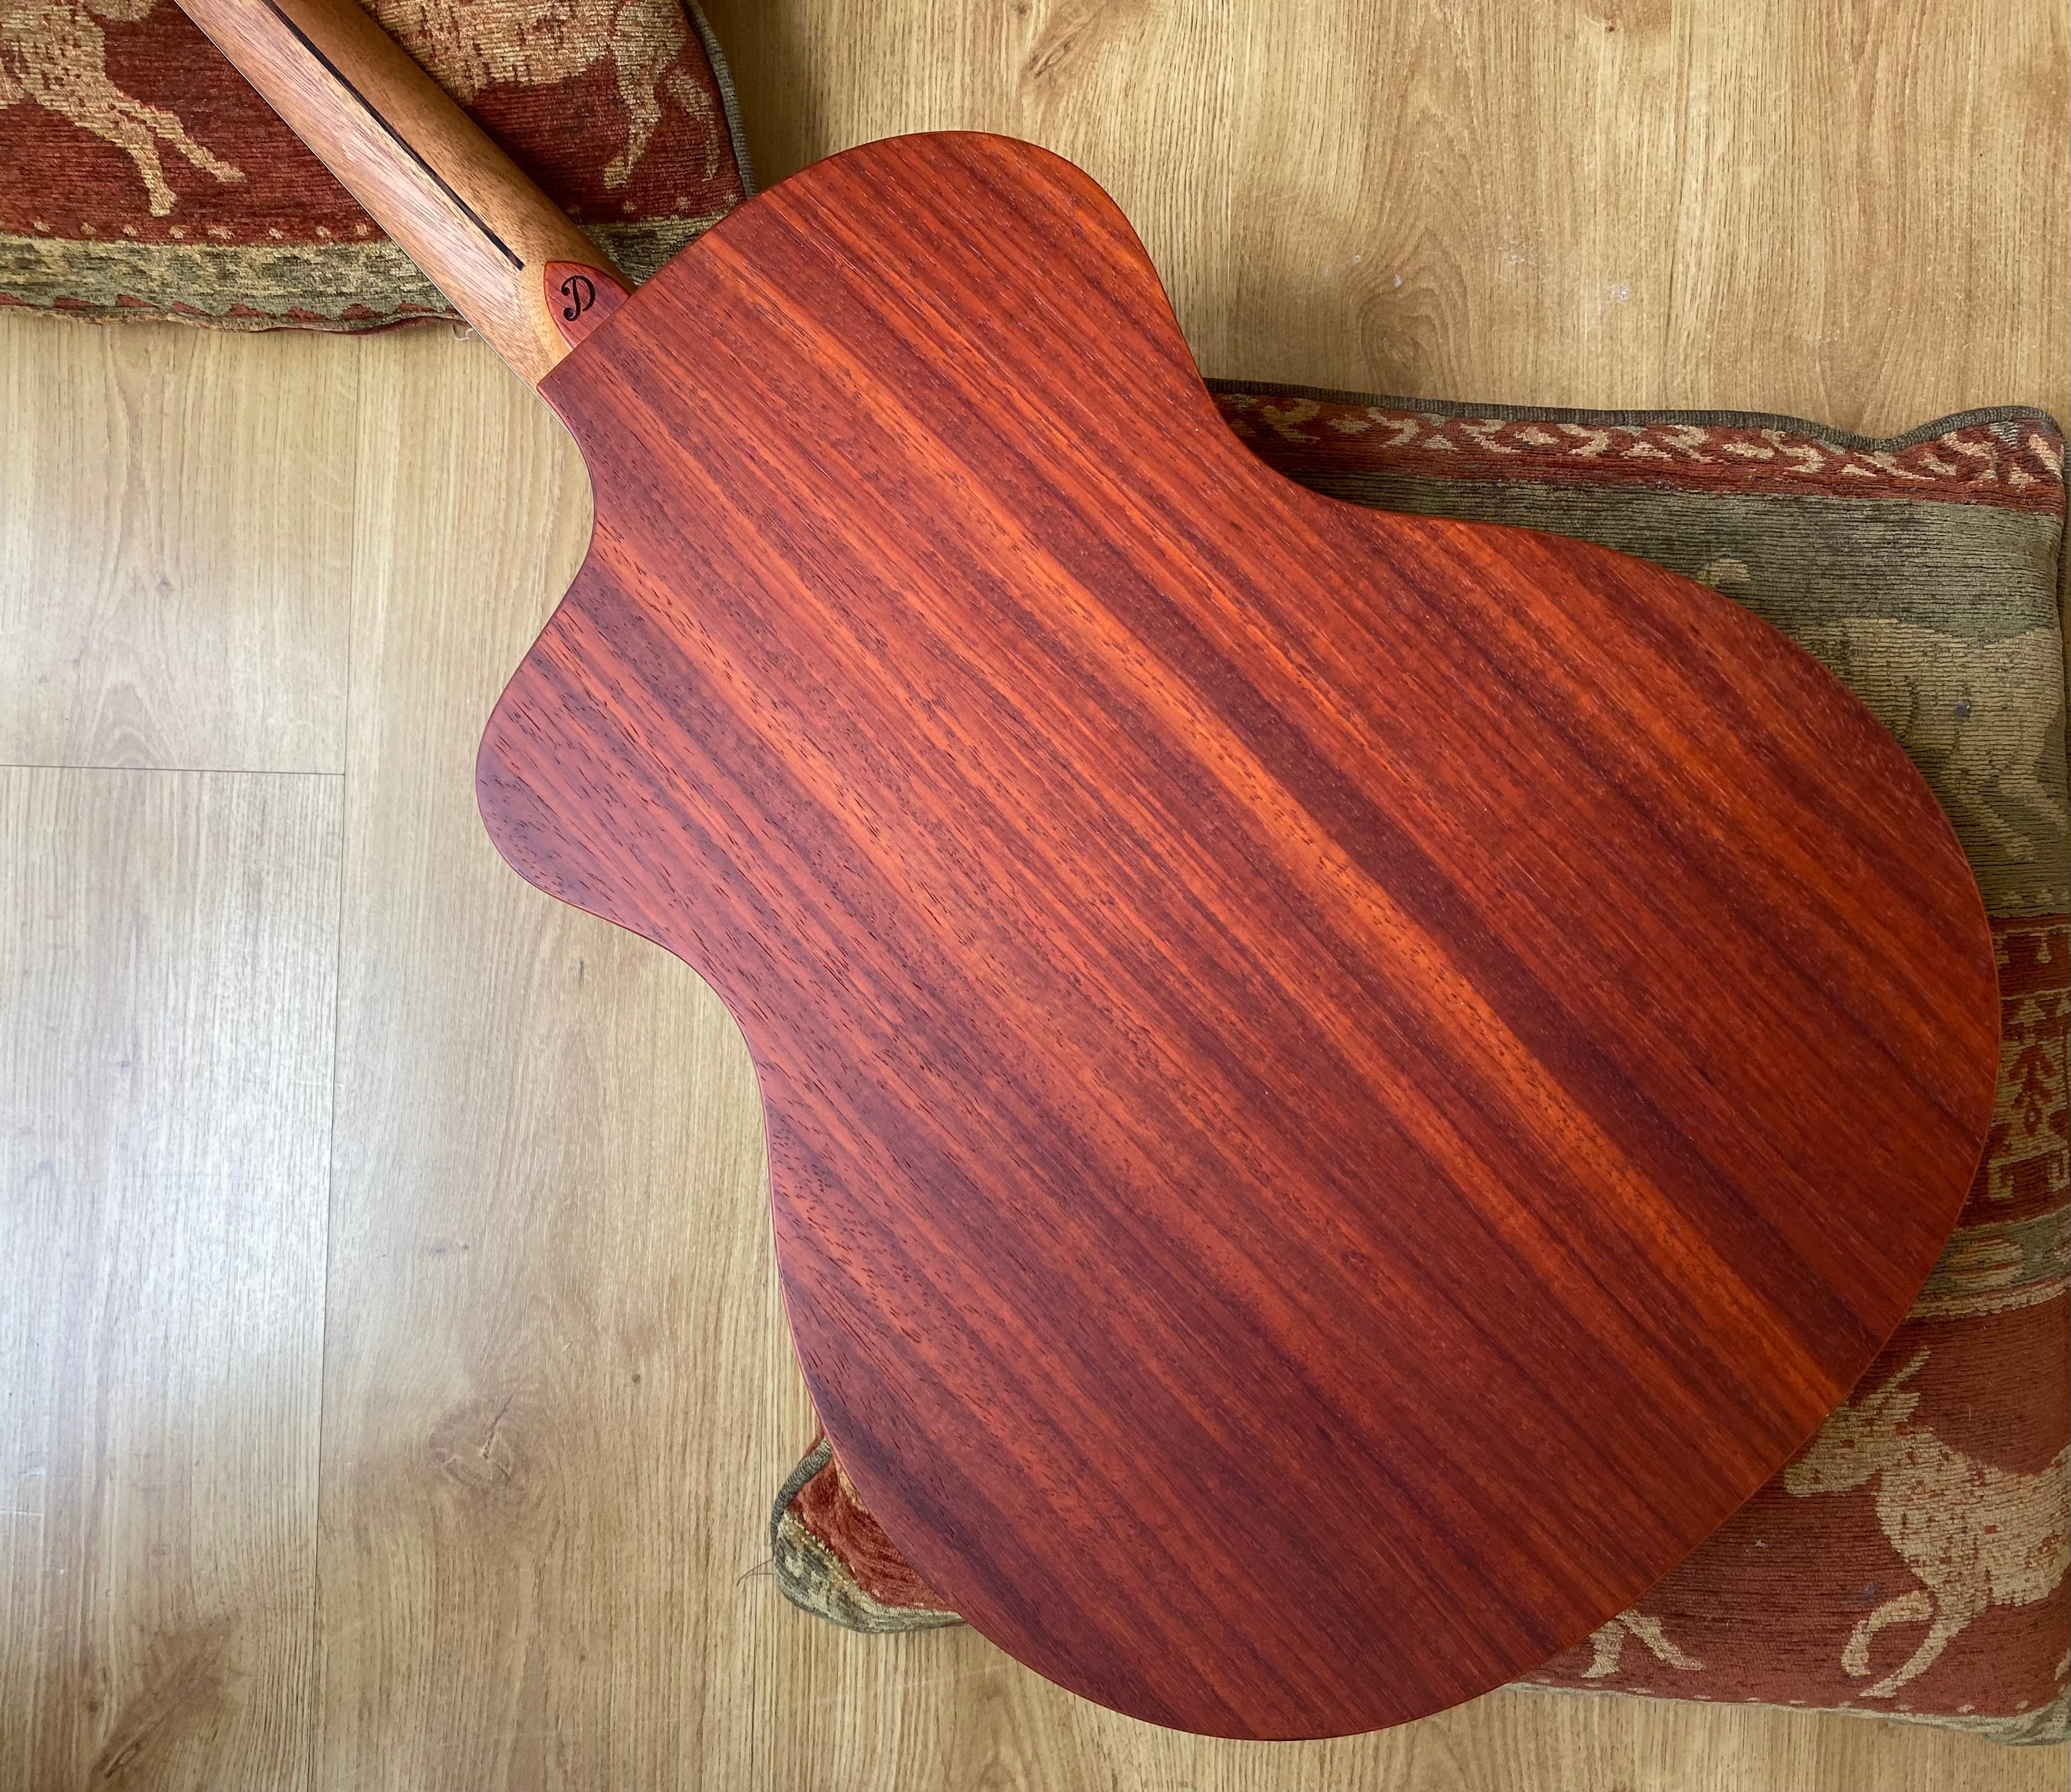 Dowina PADAUK GAC TSWS (Thermo Cured Swiss Spruce), Acoustic Guitar for sale at Richards Guitars.